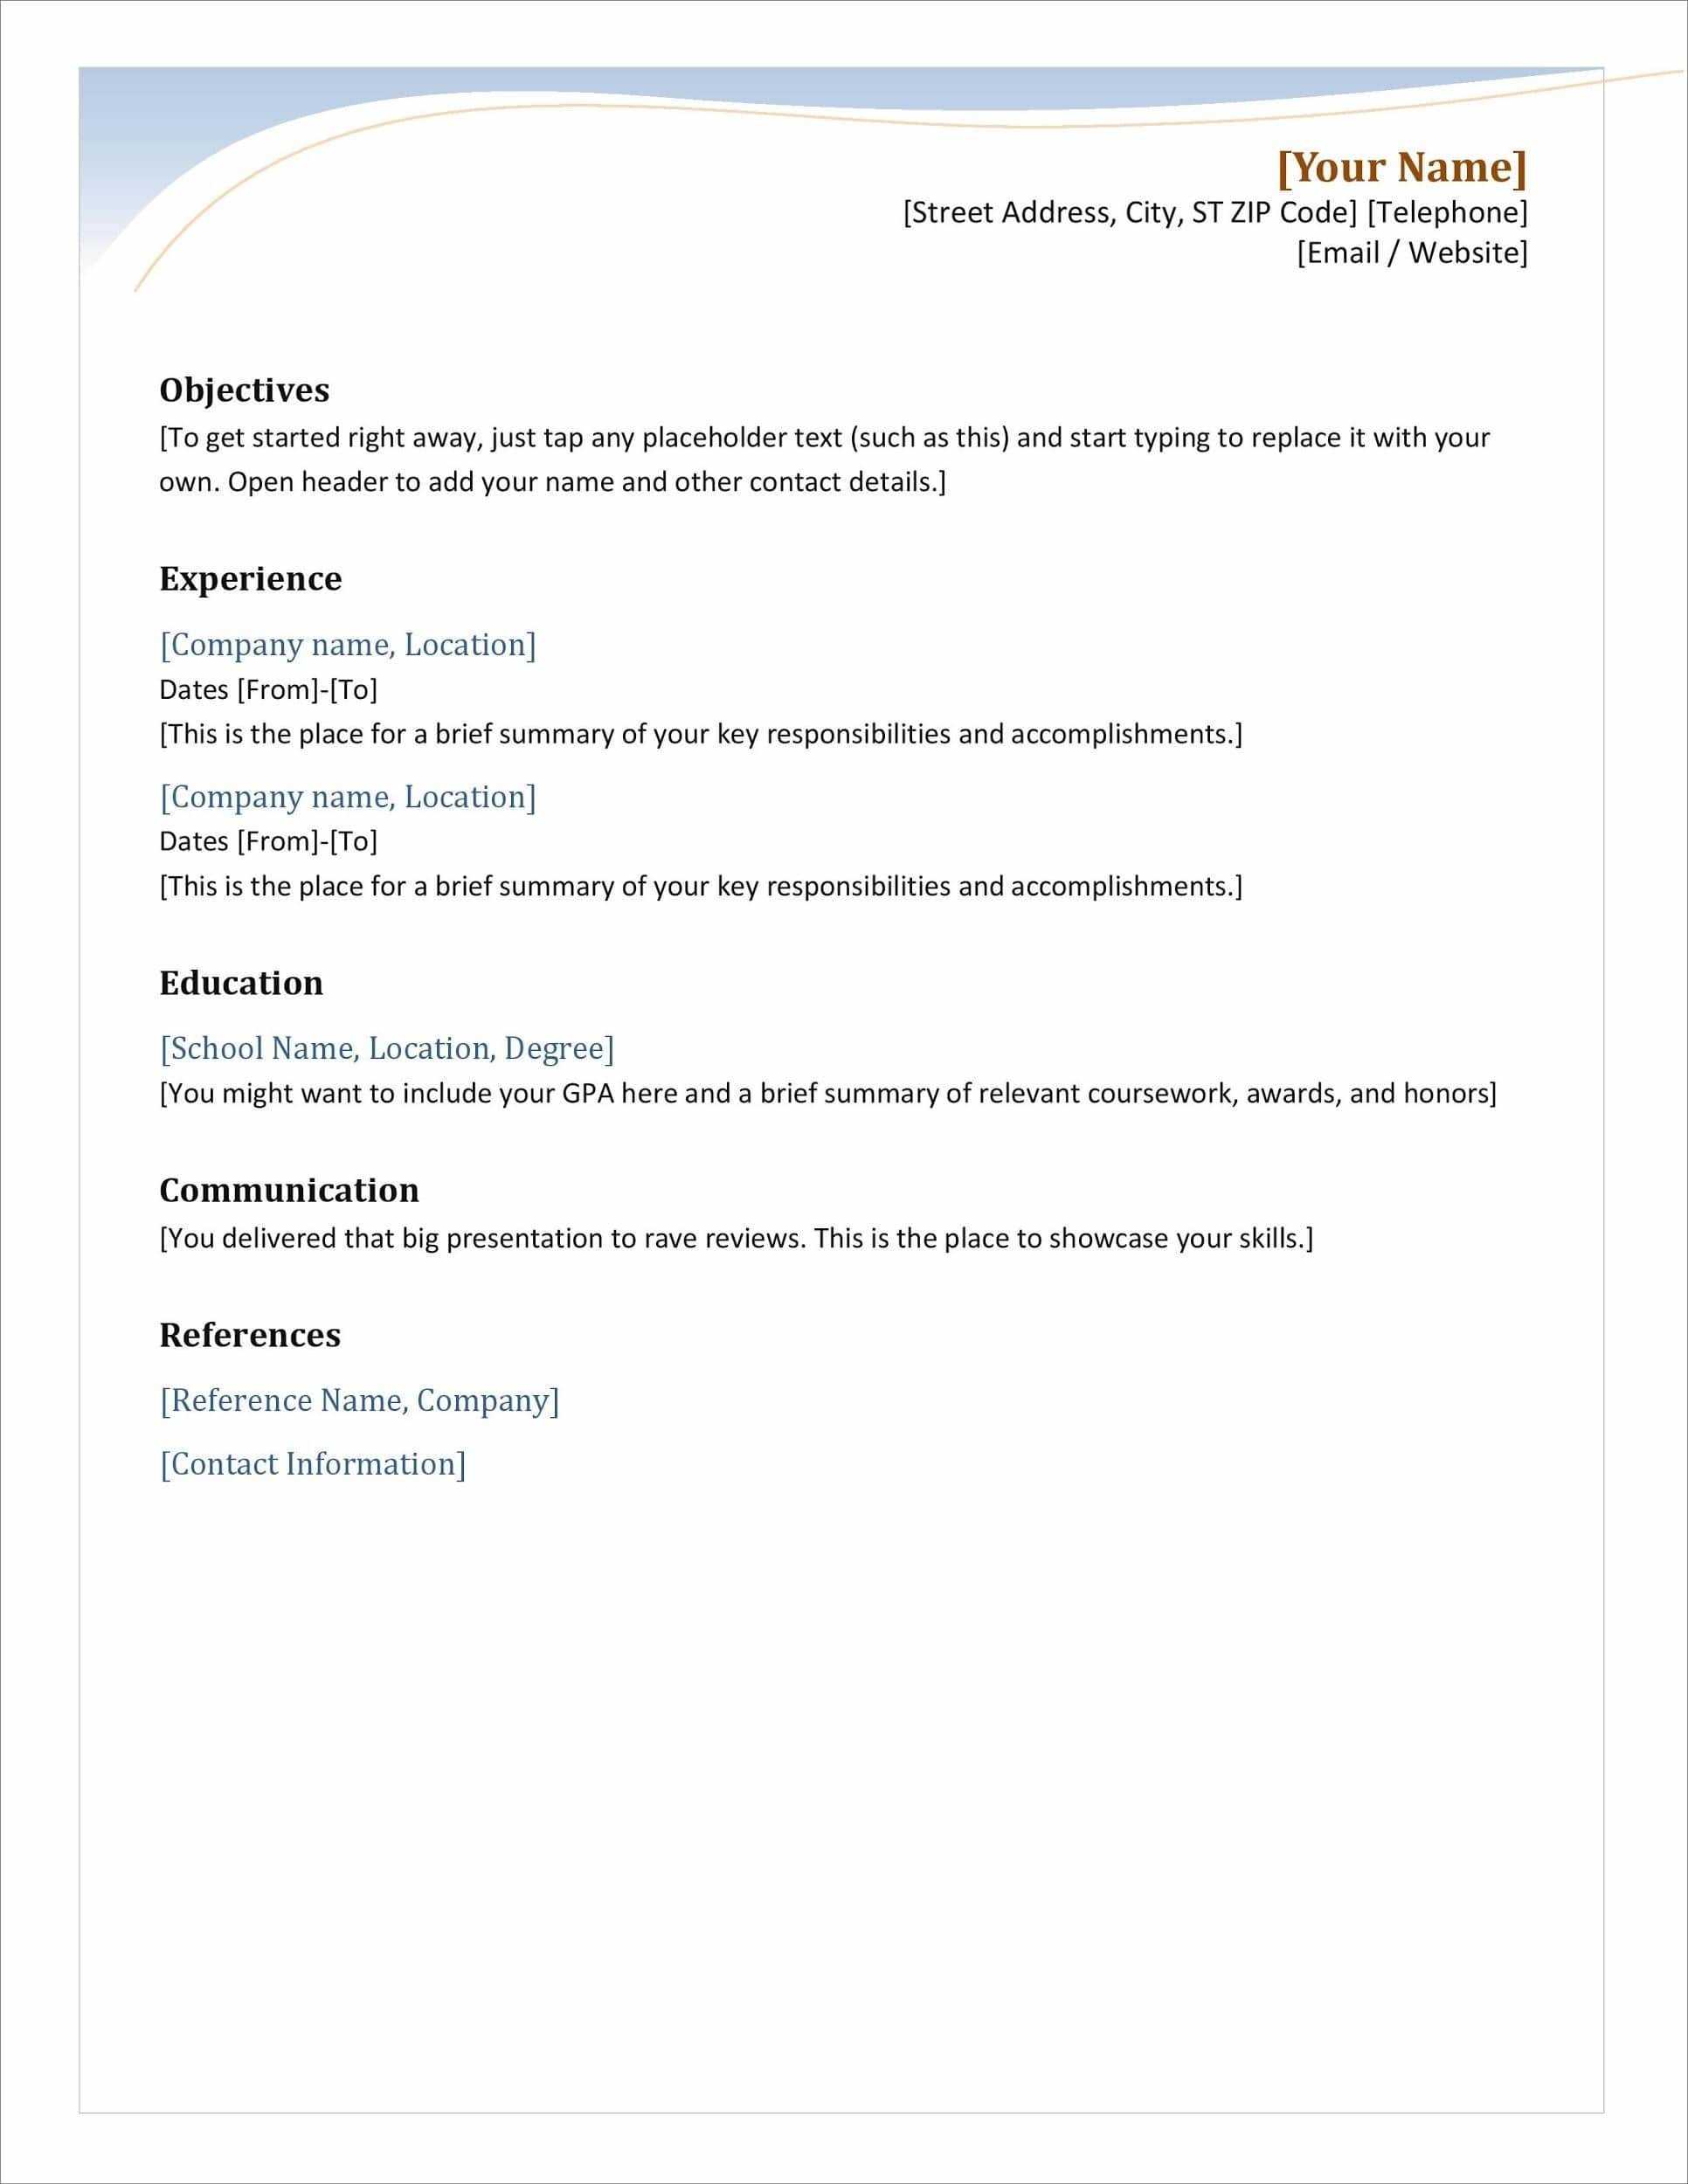 25 Resume Templates For Microsoft Word [Free Download] Within Blank Resume Templates For Microsoft Word